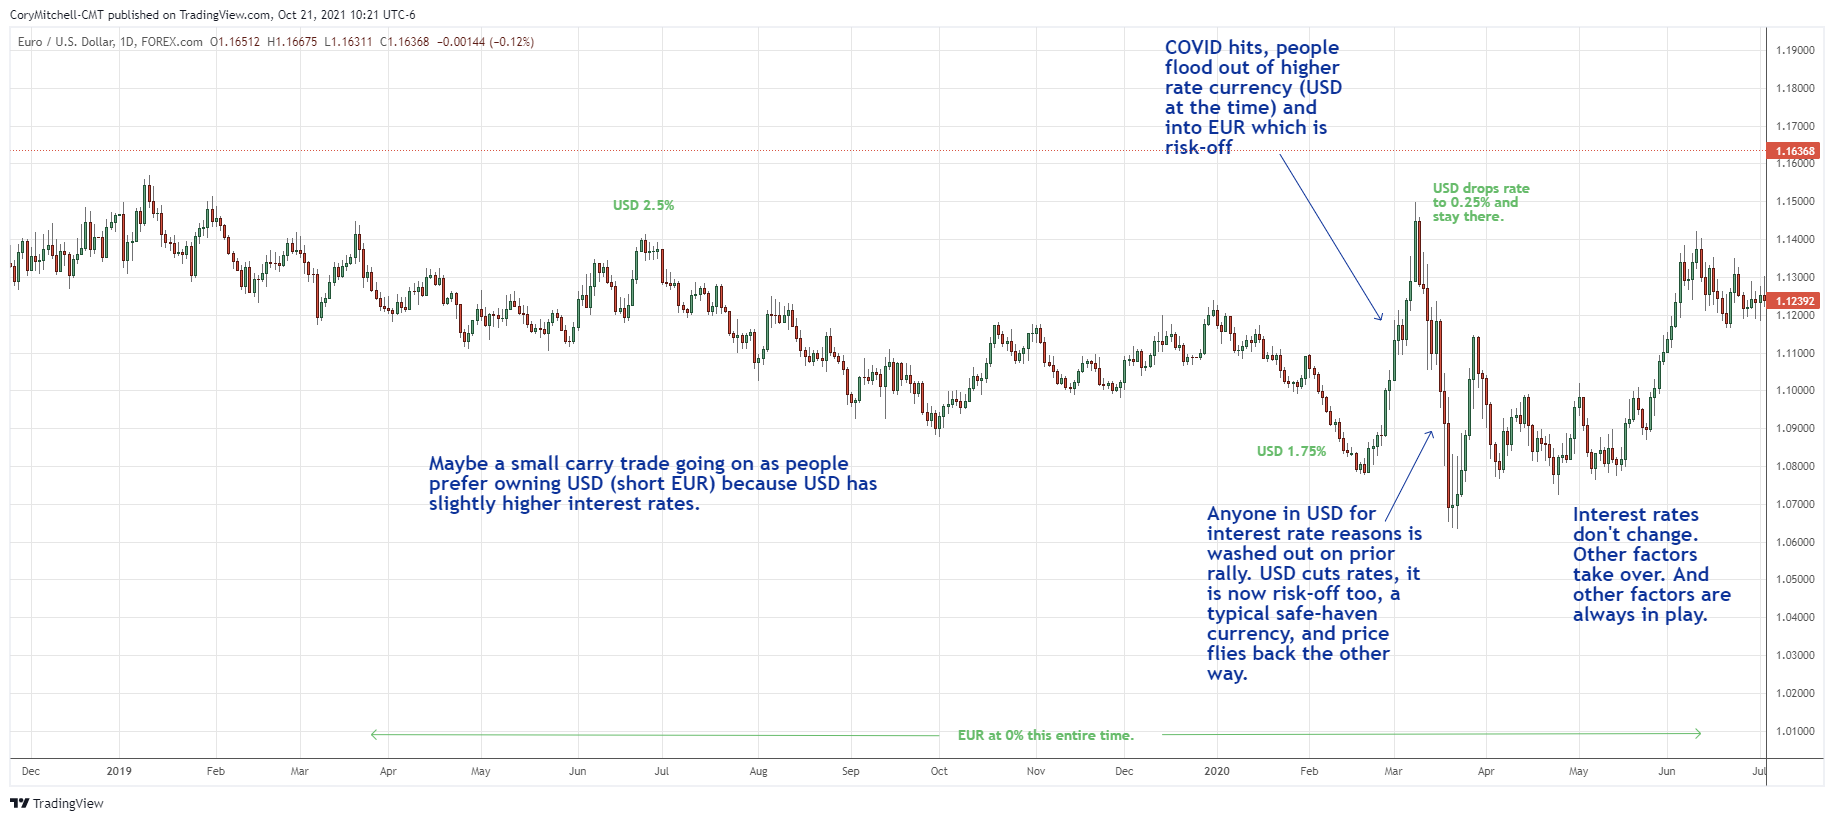 EURUSD price action during COVID driven by carry trade, interest rate changes, and risk-on and risk-off sentiment